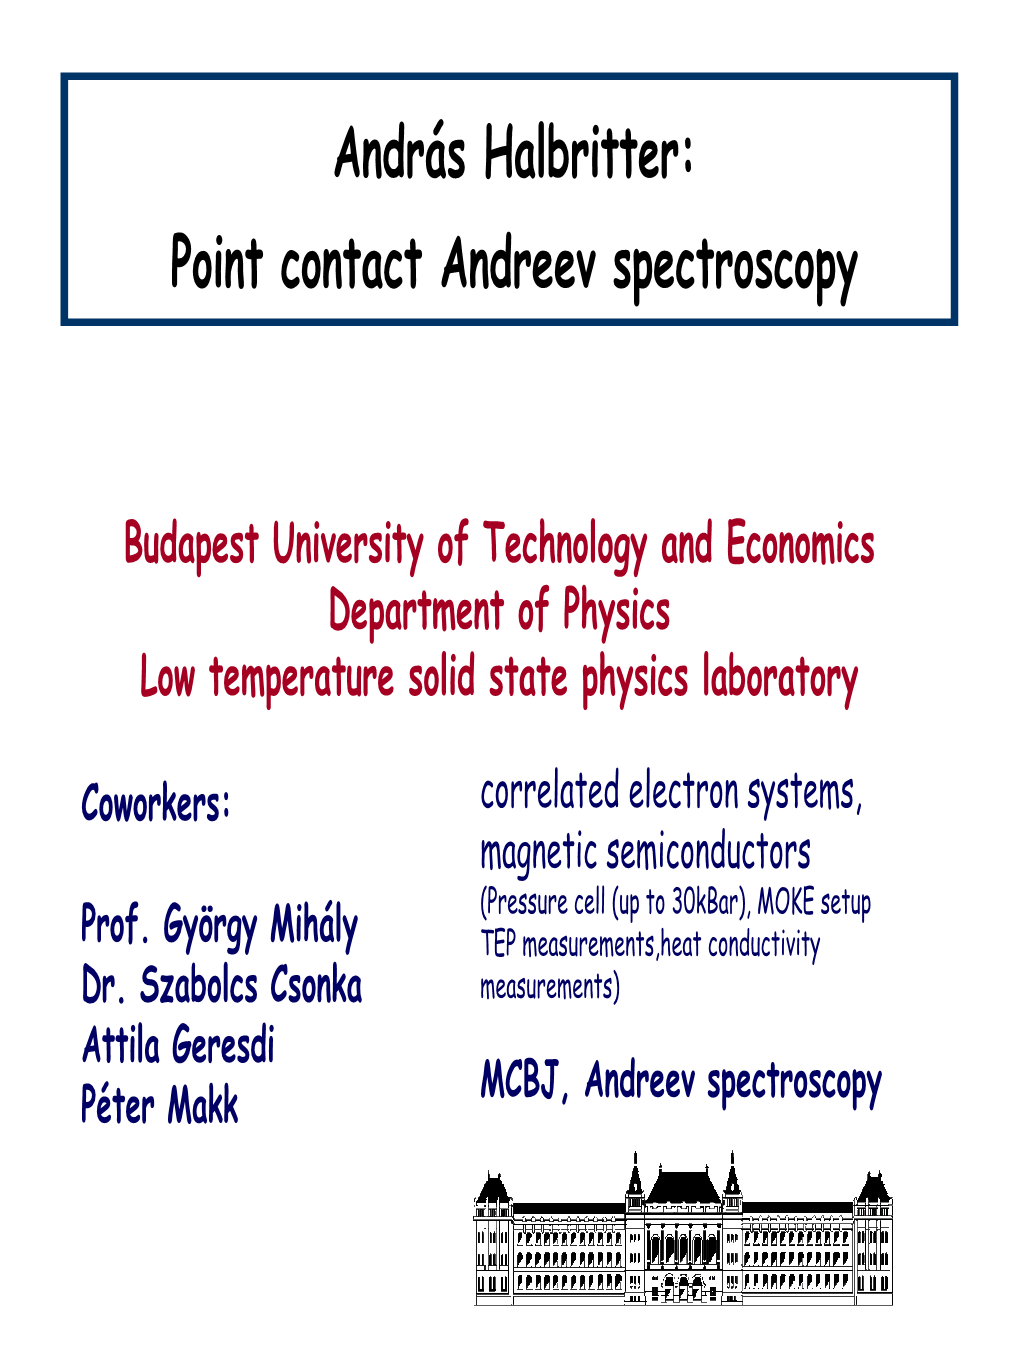 András Halbritter: Point Contact Andreev Spectroscopy